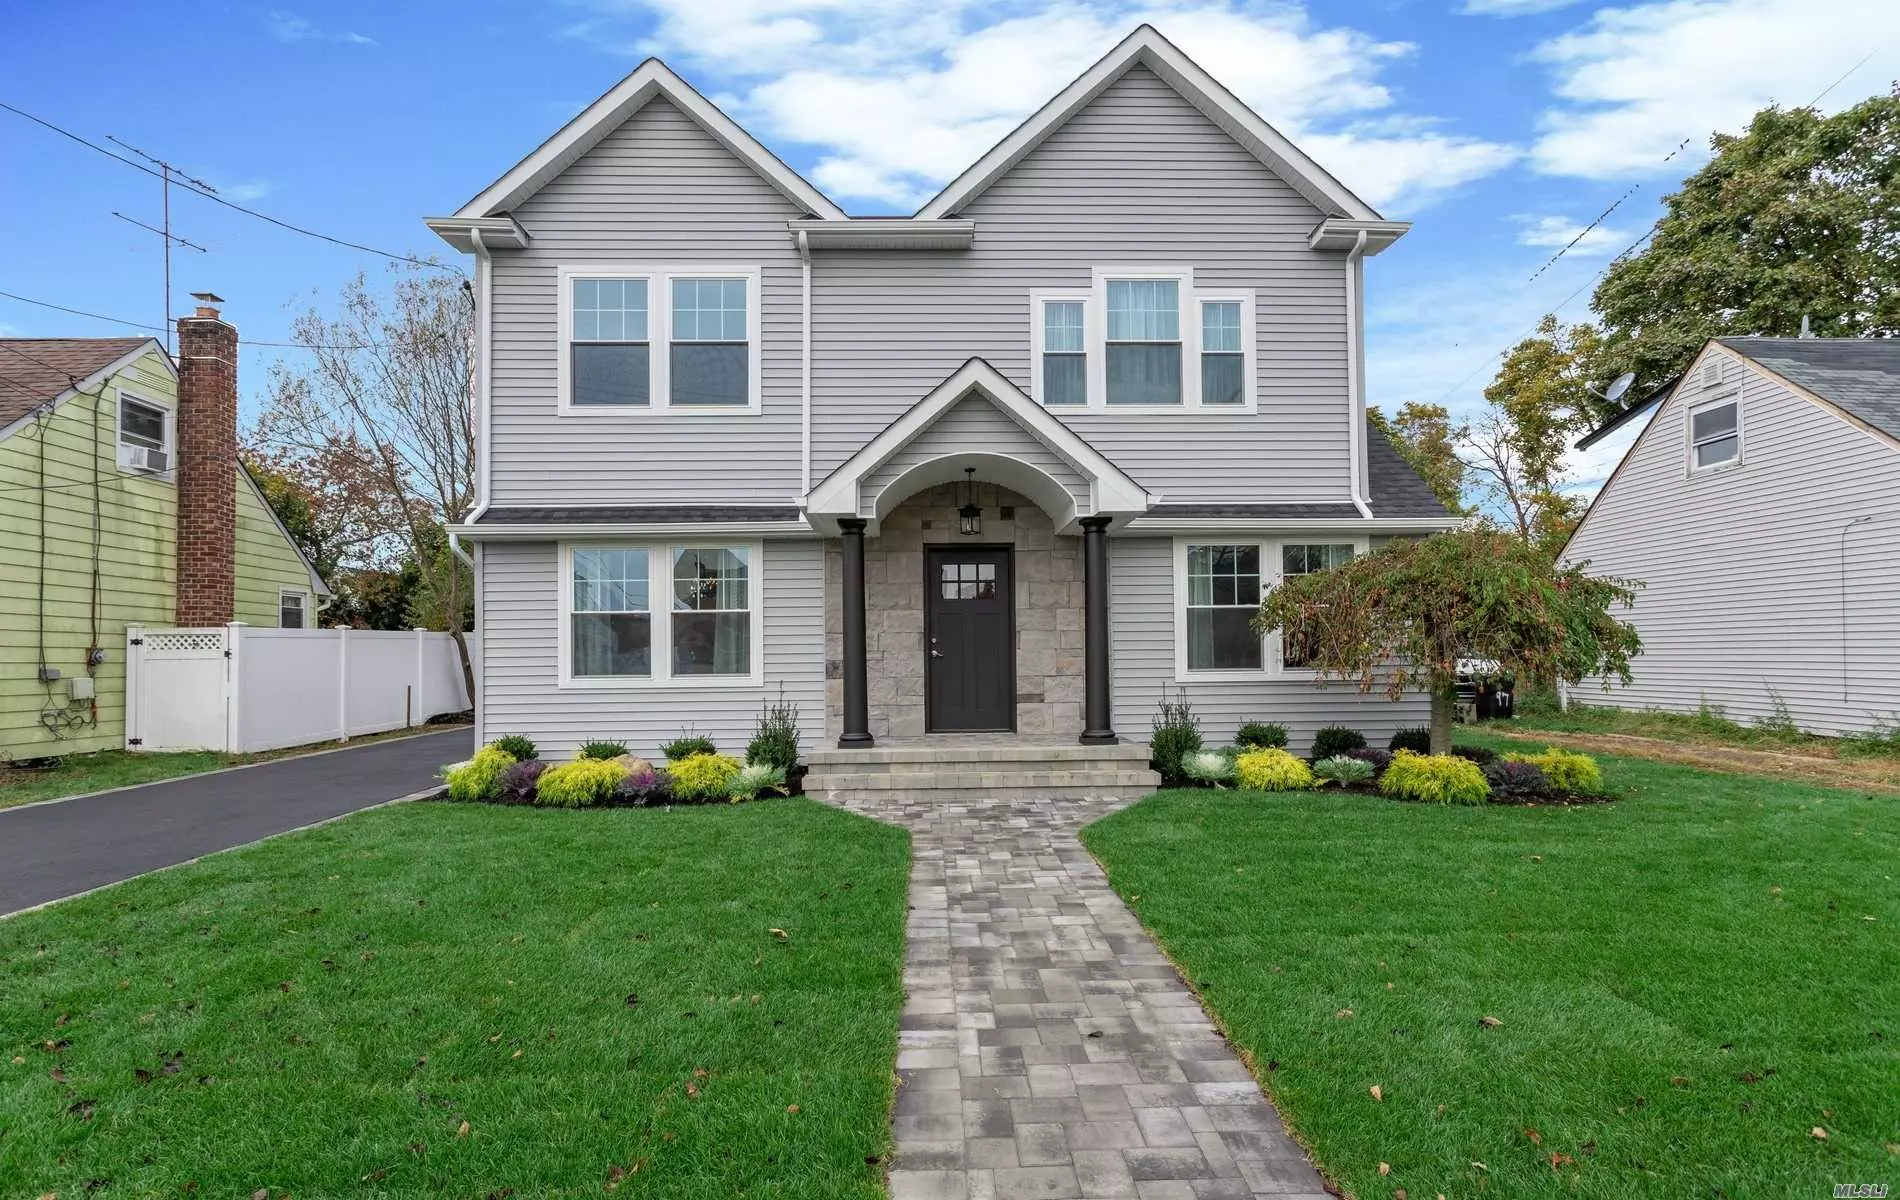 Completely Renovated 4 Bedroom, 3 Bath Colonial with High End Finishes.  Quartzite Countertops, Stainless Steel Appliances and Excellent Craftsmanship. Hard Wood Floors, CAC, Full Basement.  A Must See. Plainedge School District.